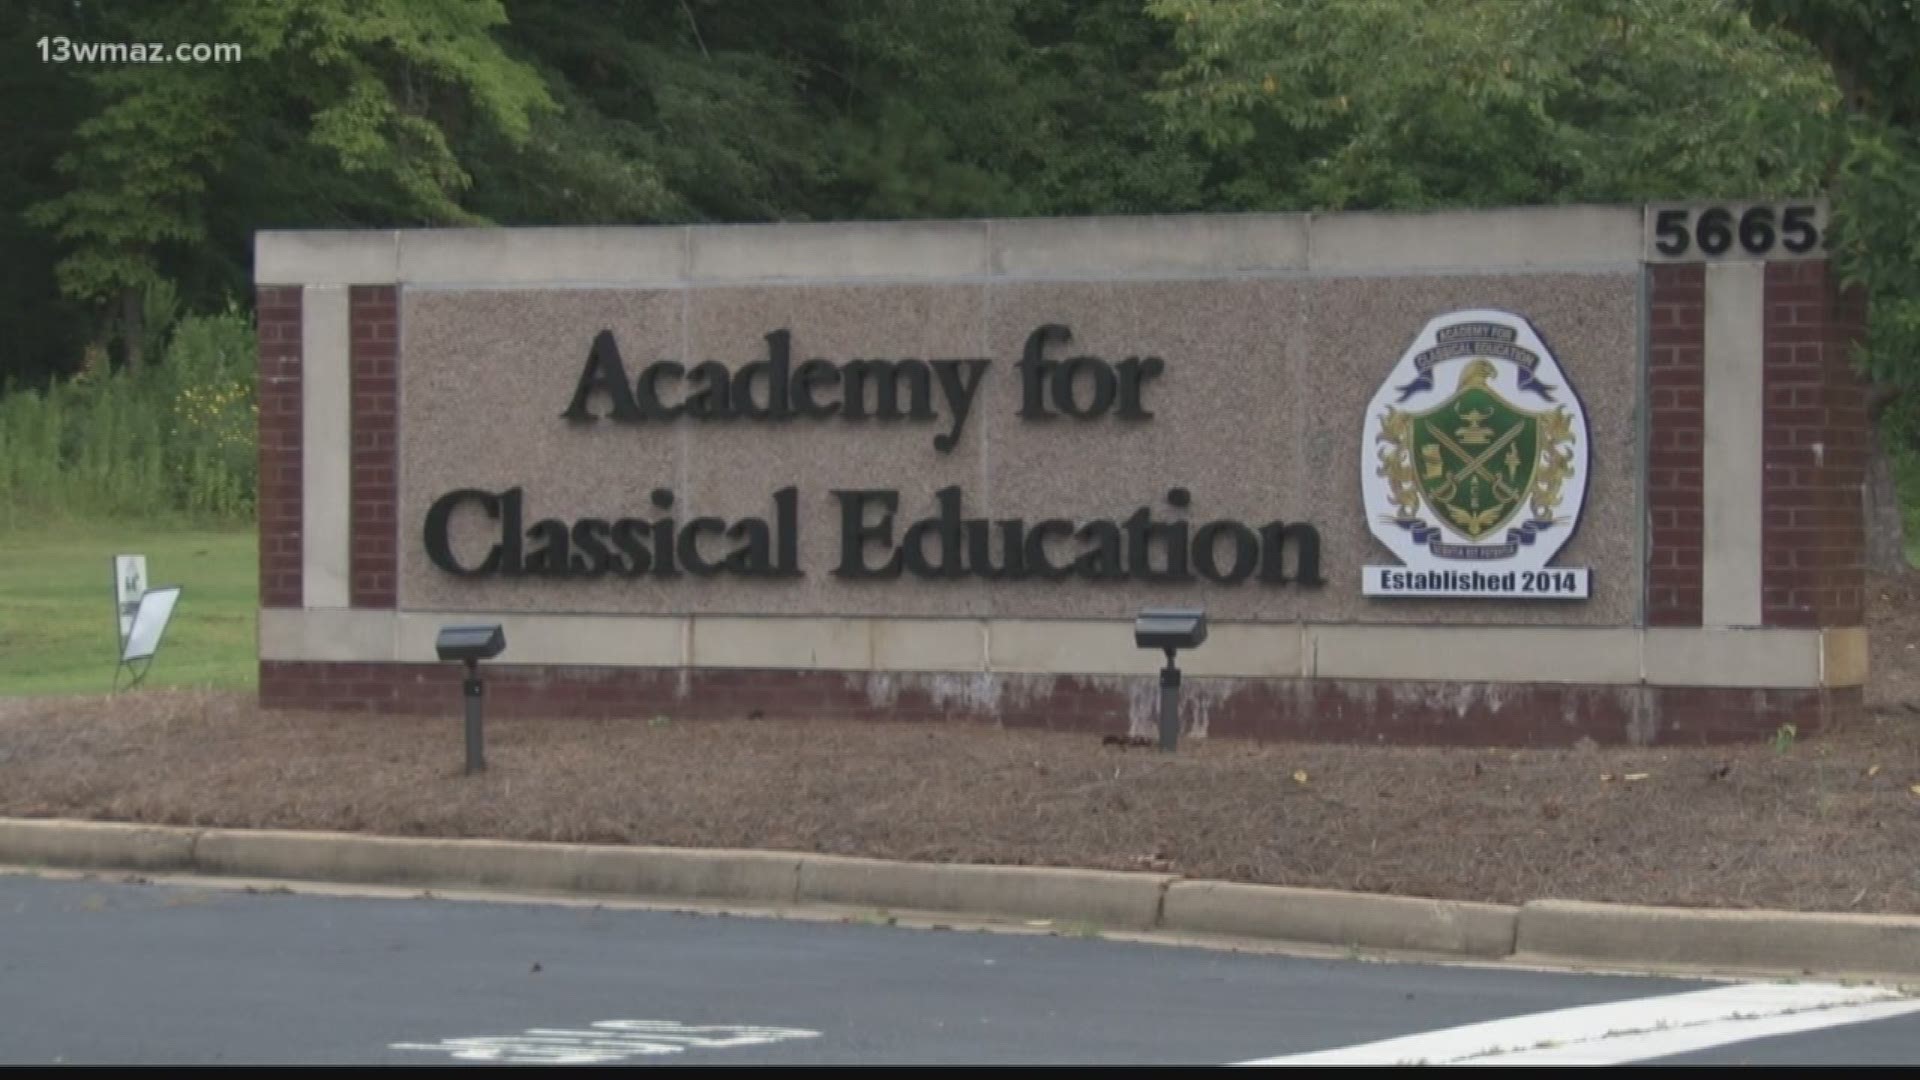 Academy For Classical Education To Become State-chartered 13wmazcom